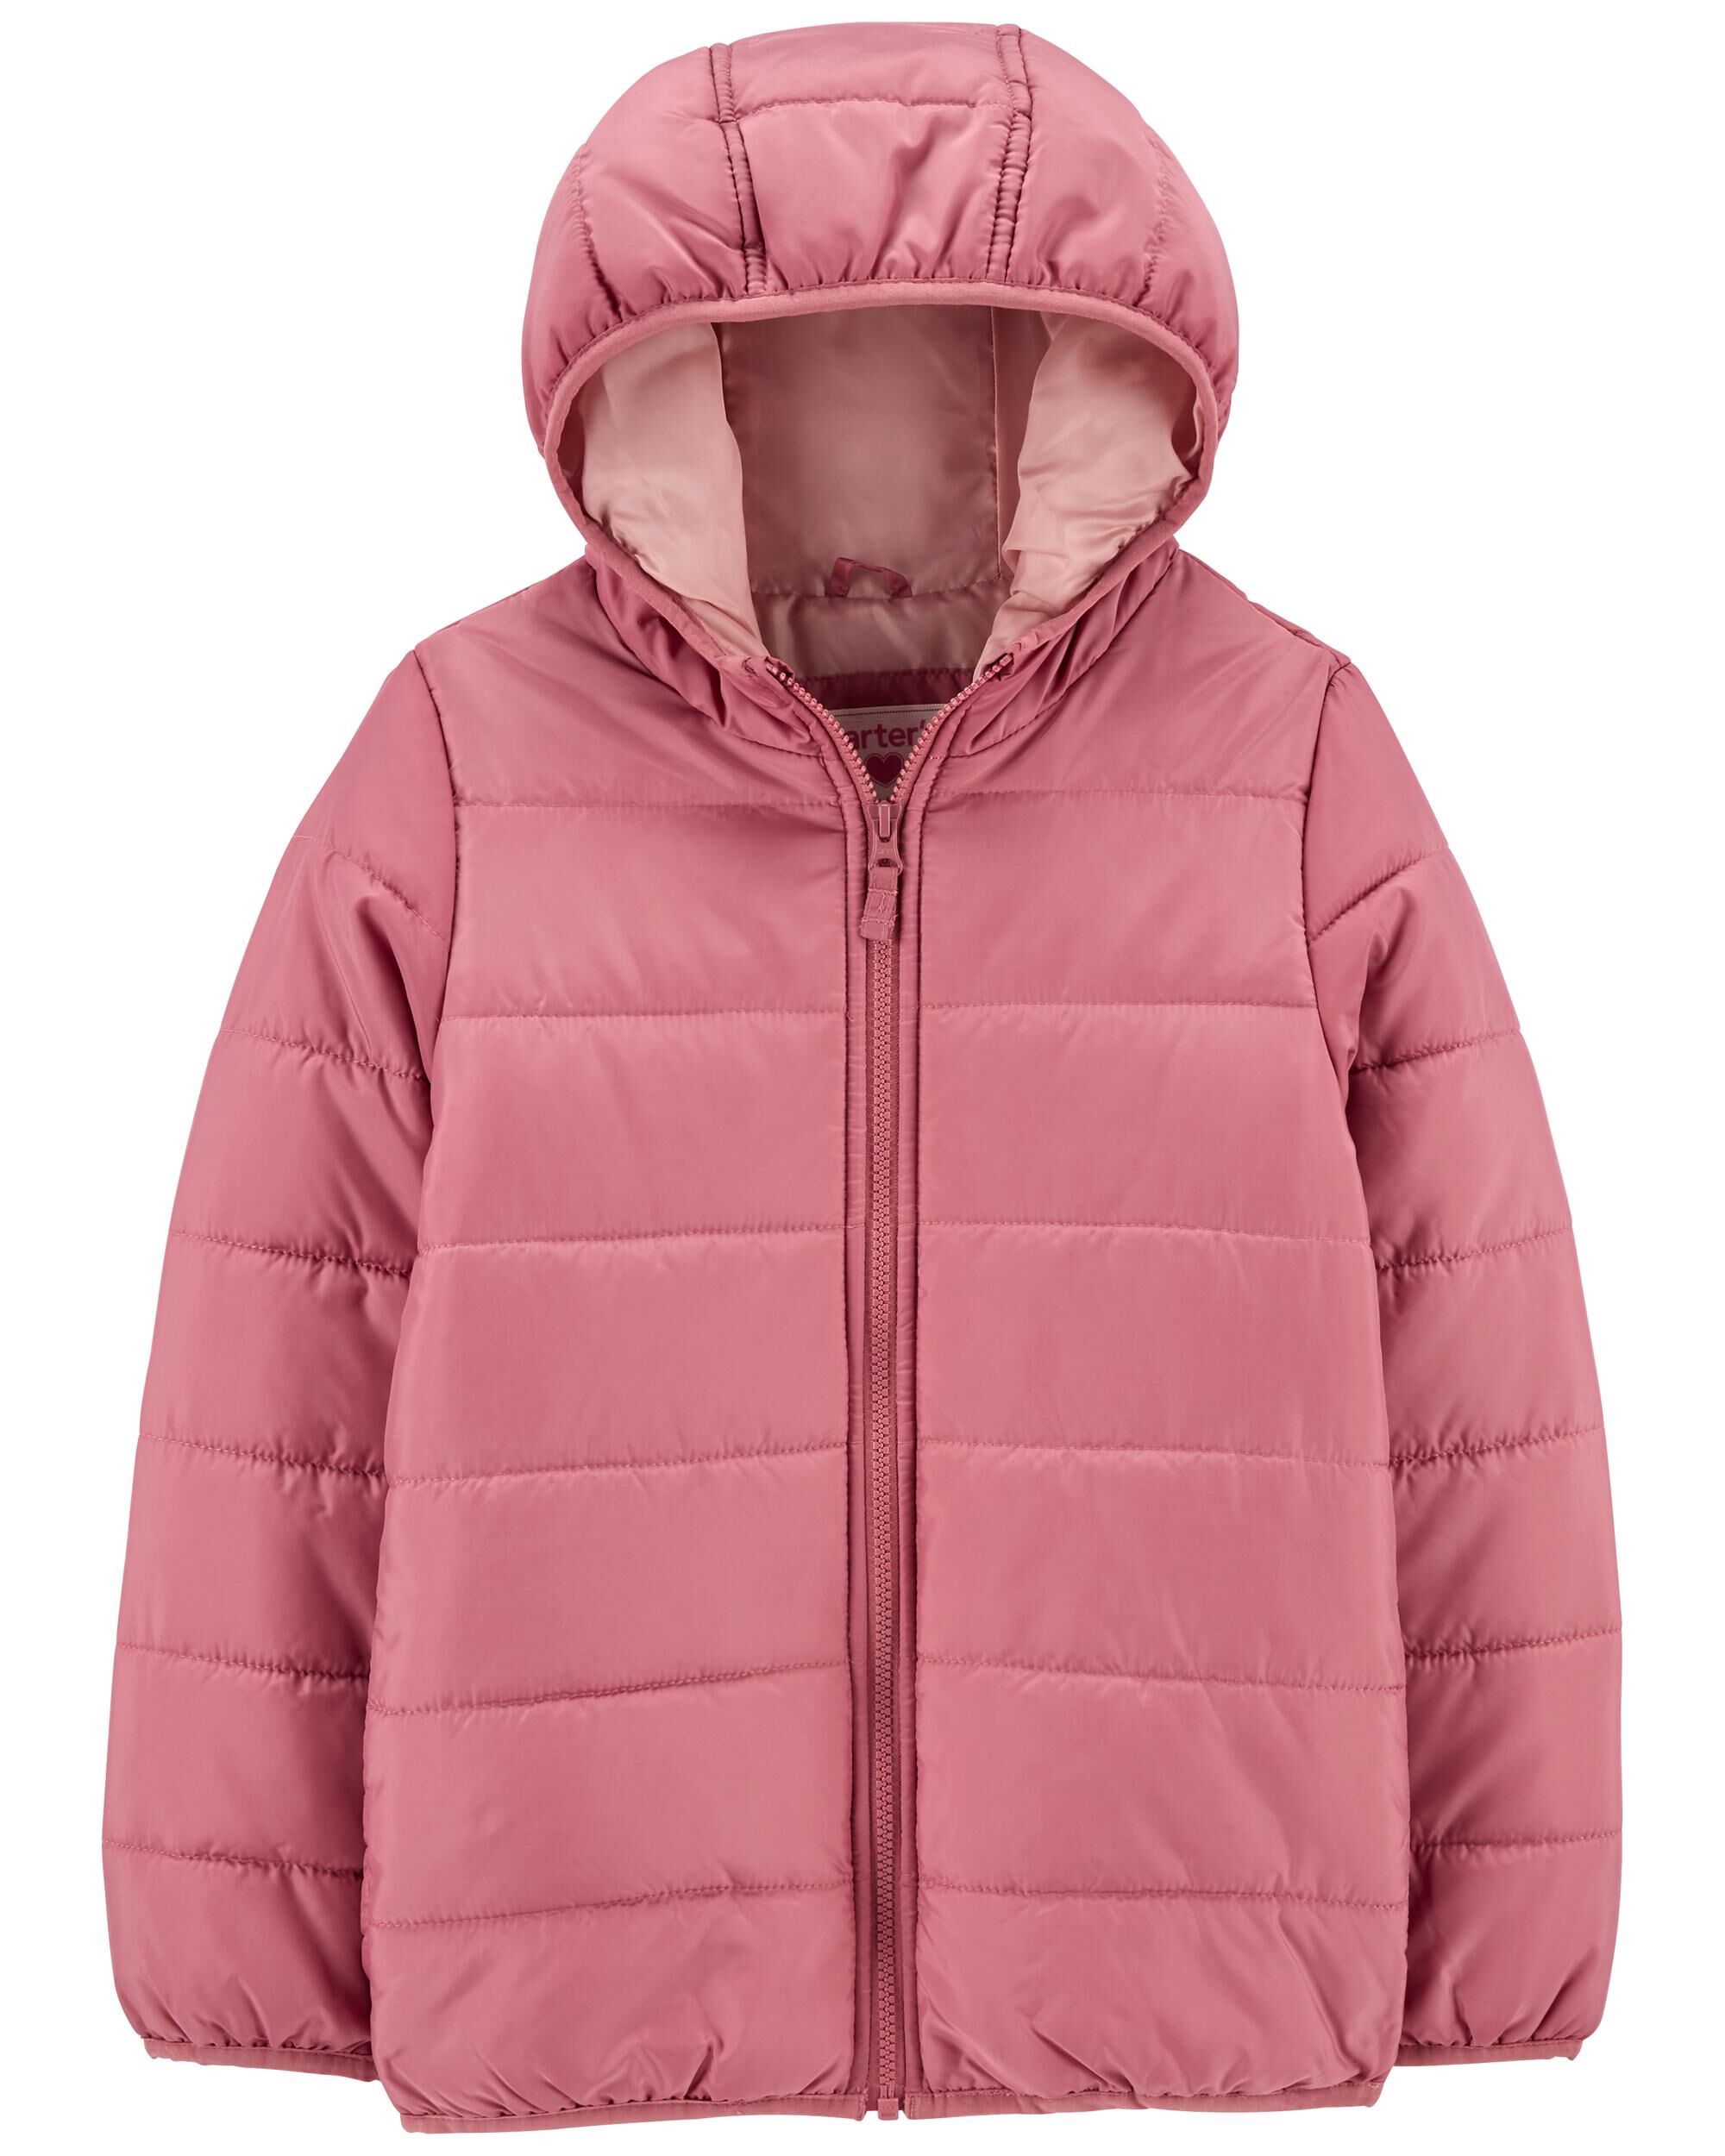 discount 73% KIDS FASHION Jackets NO STYLE NoName light jacket Pink 14Y 